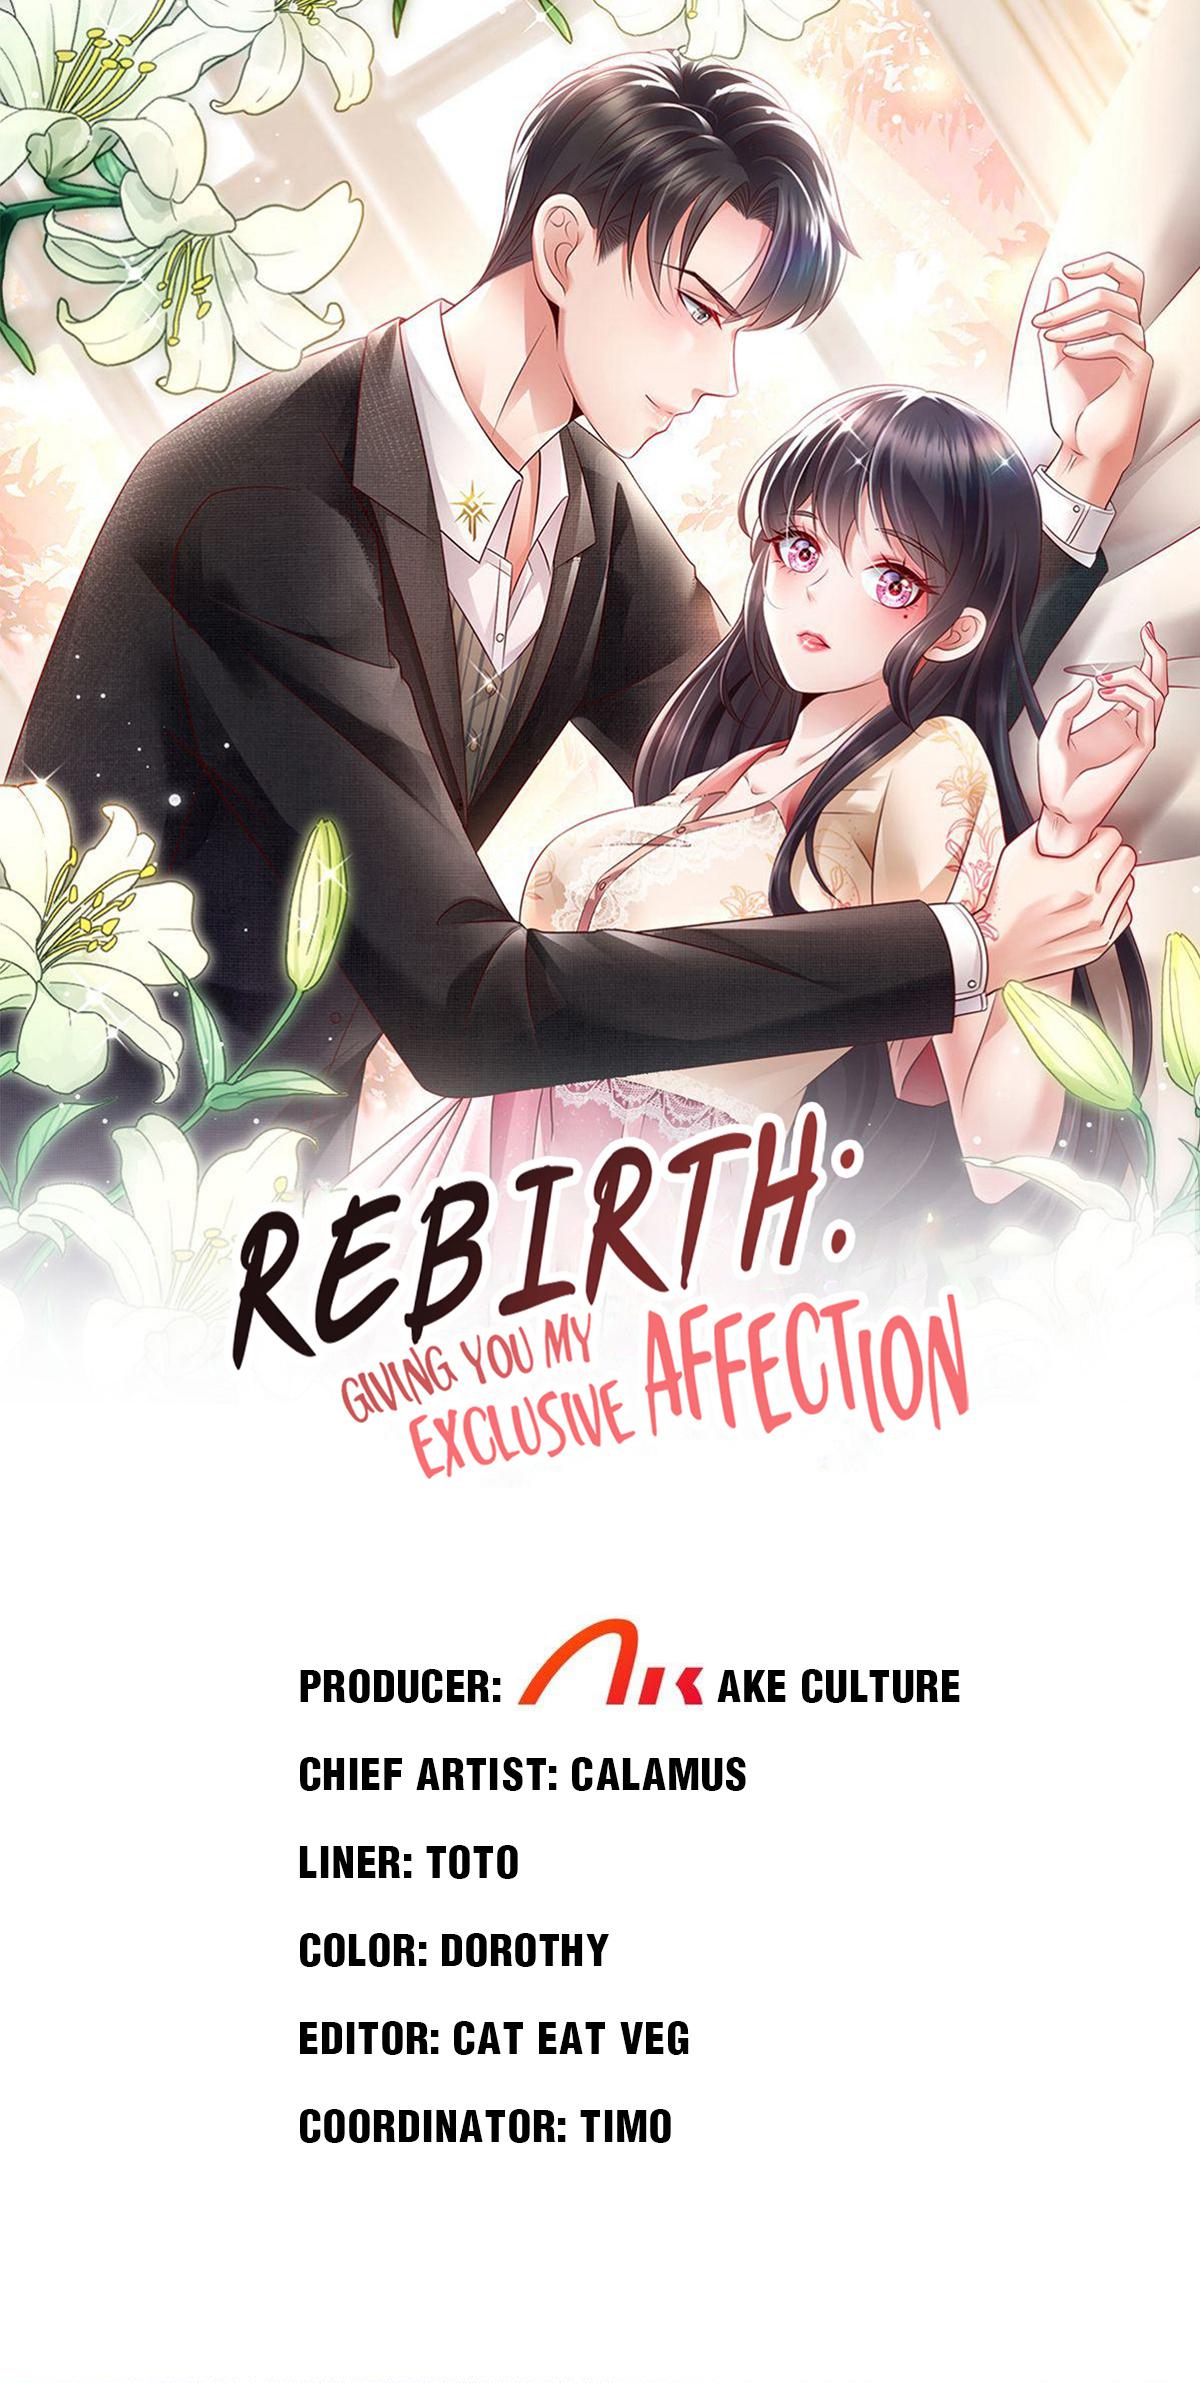 Rebirth: Giving You My Exclusive Affection 191